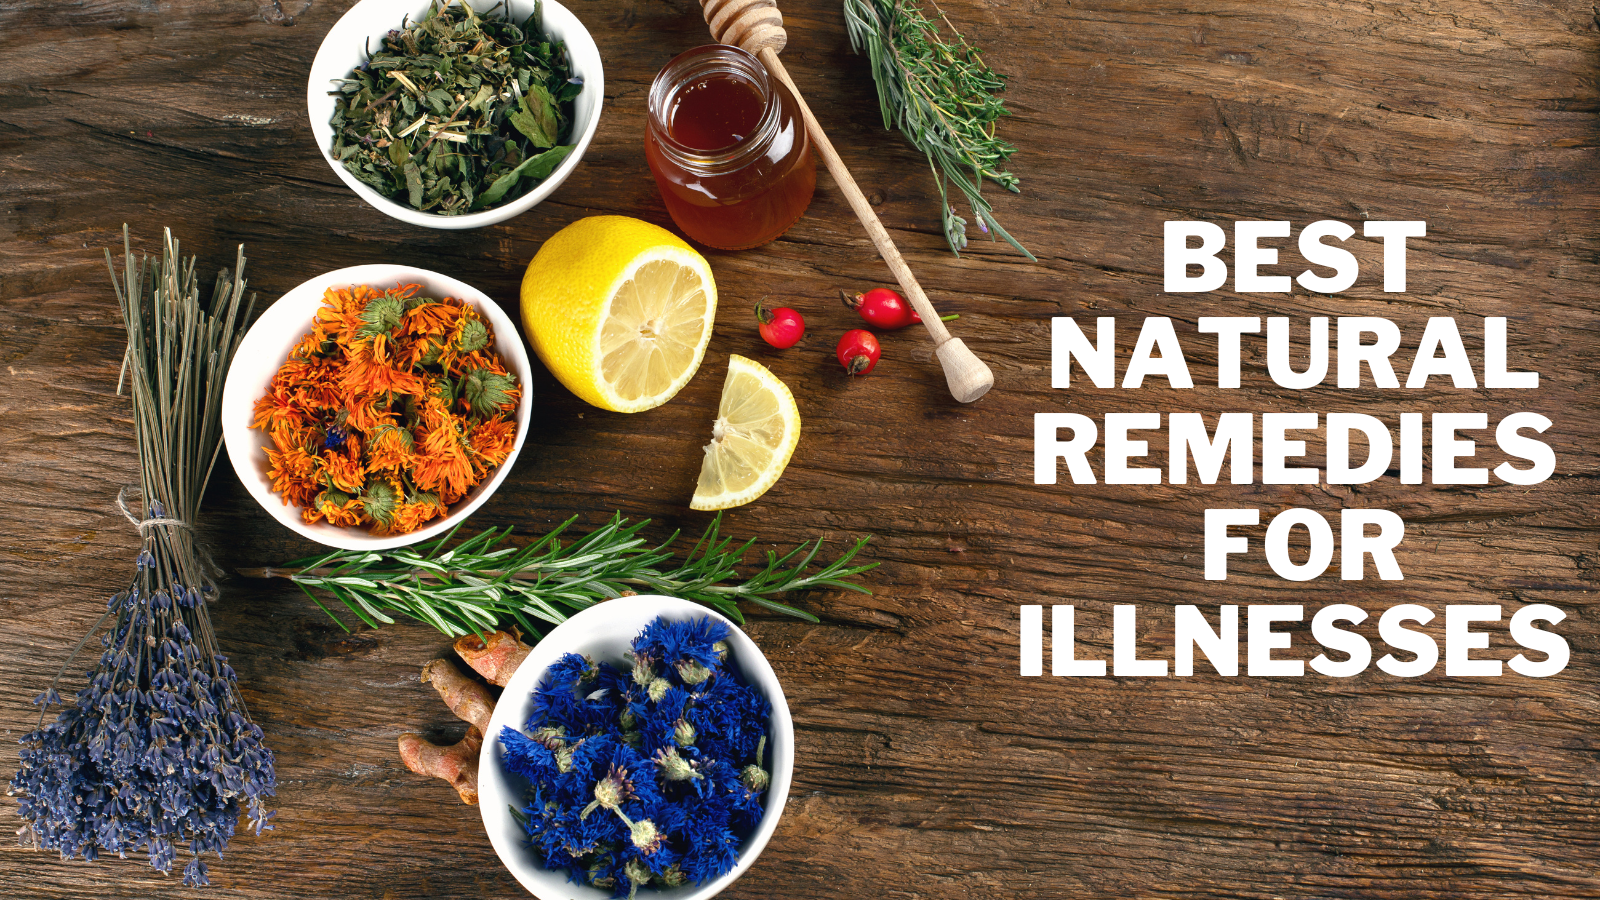 Best Natural Remedies For Illnesses